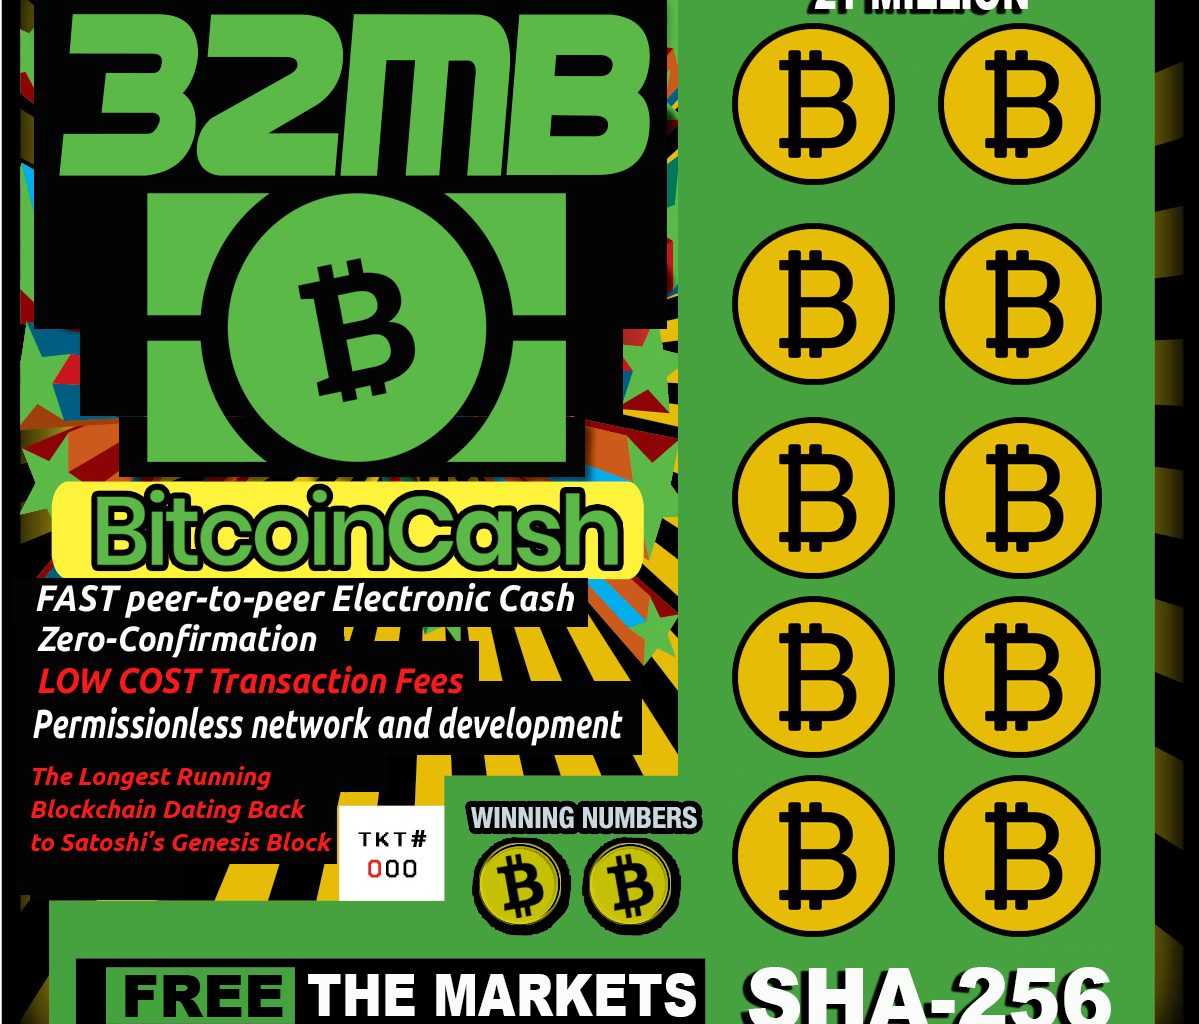 Five Reasons Why Bitcoin Cash Is About To Win Big Bitcoin News - 